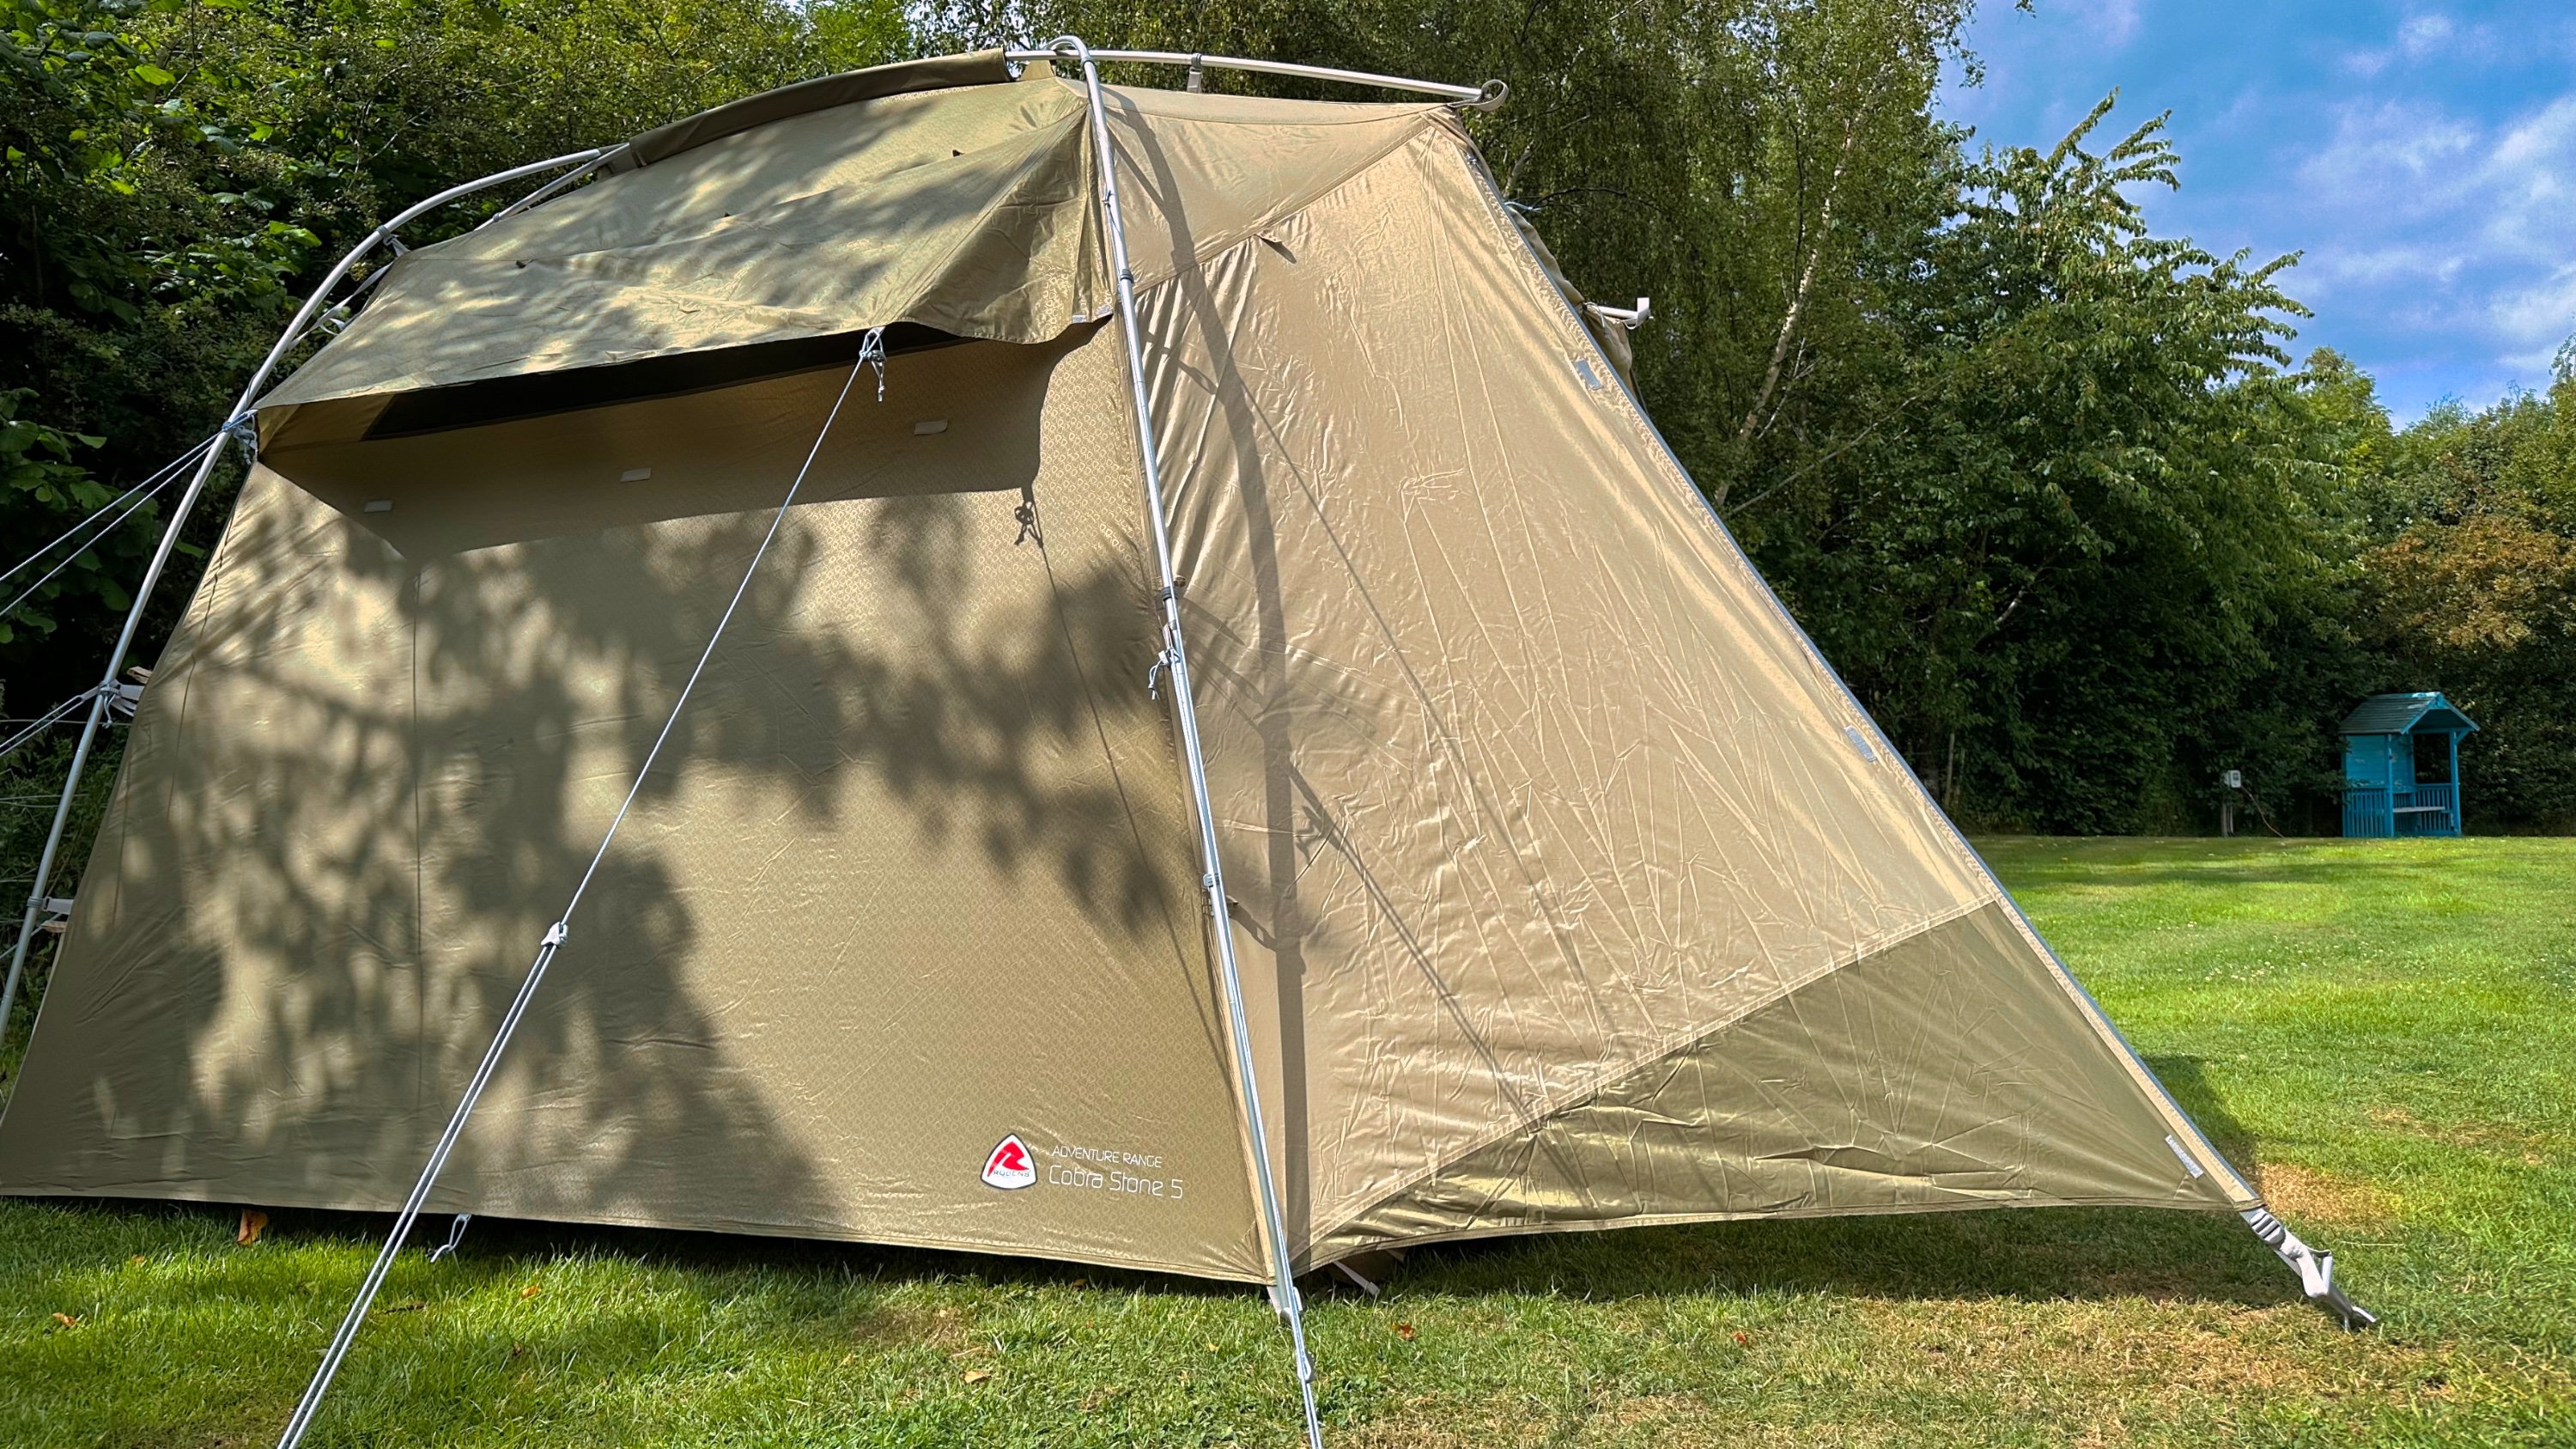 The Robens Cobra Stone 5 Tent pitched at the campsite